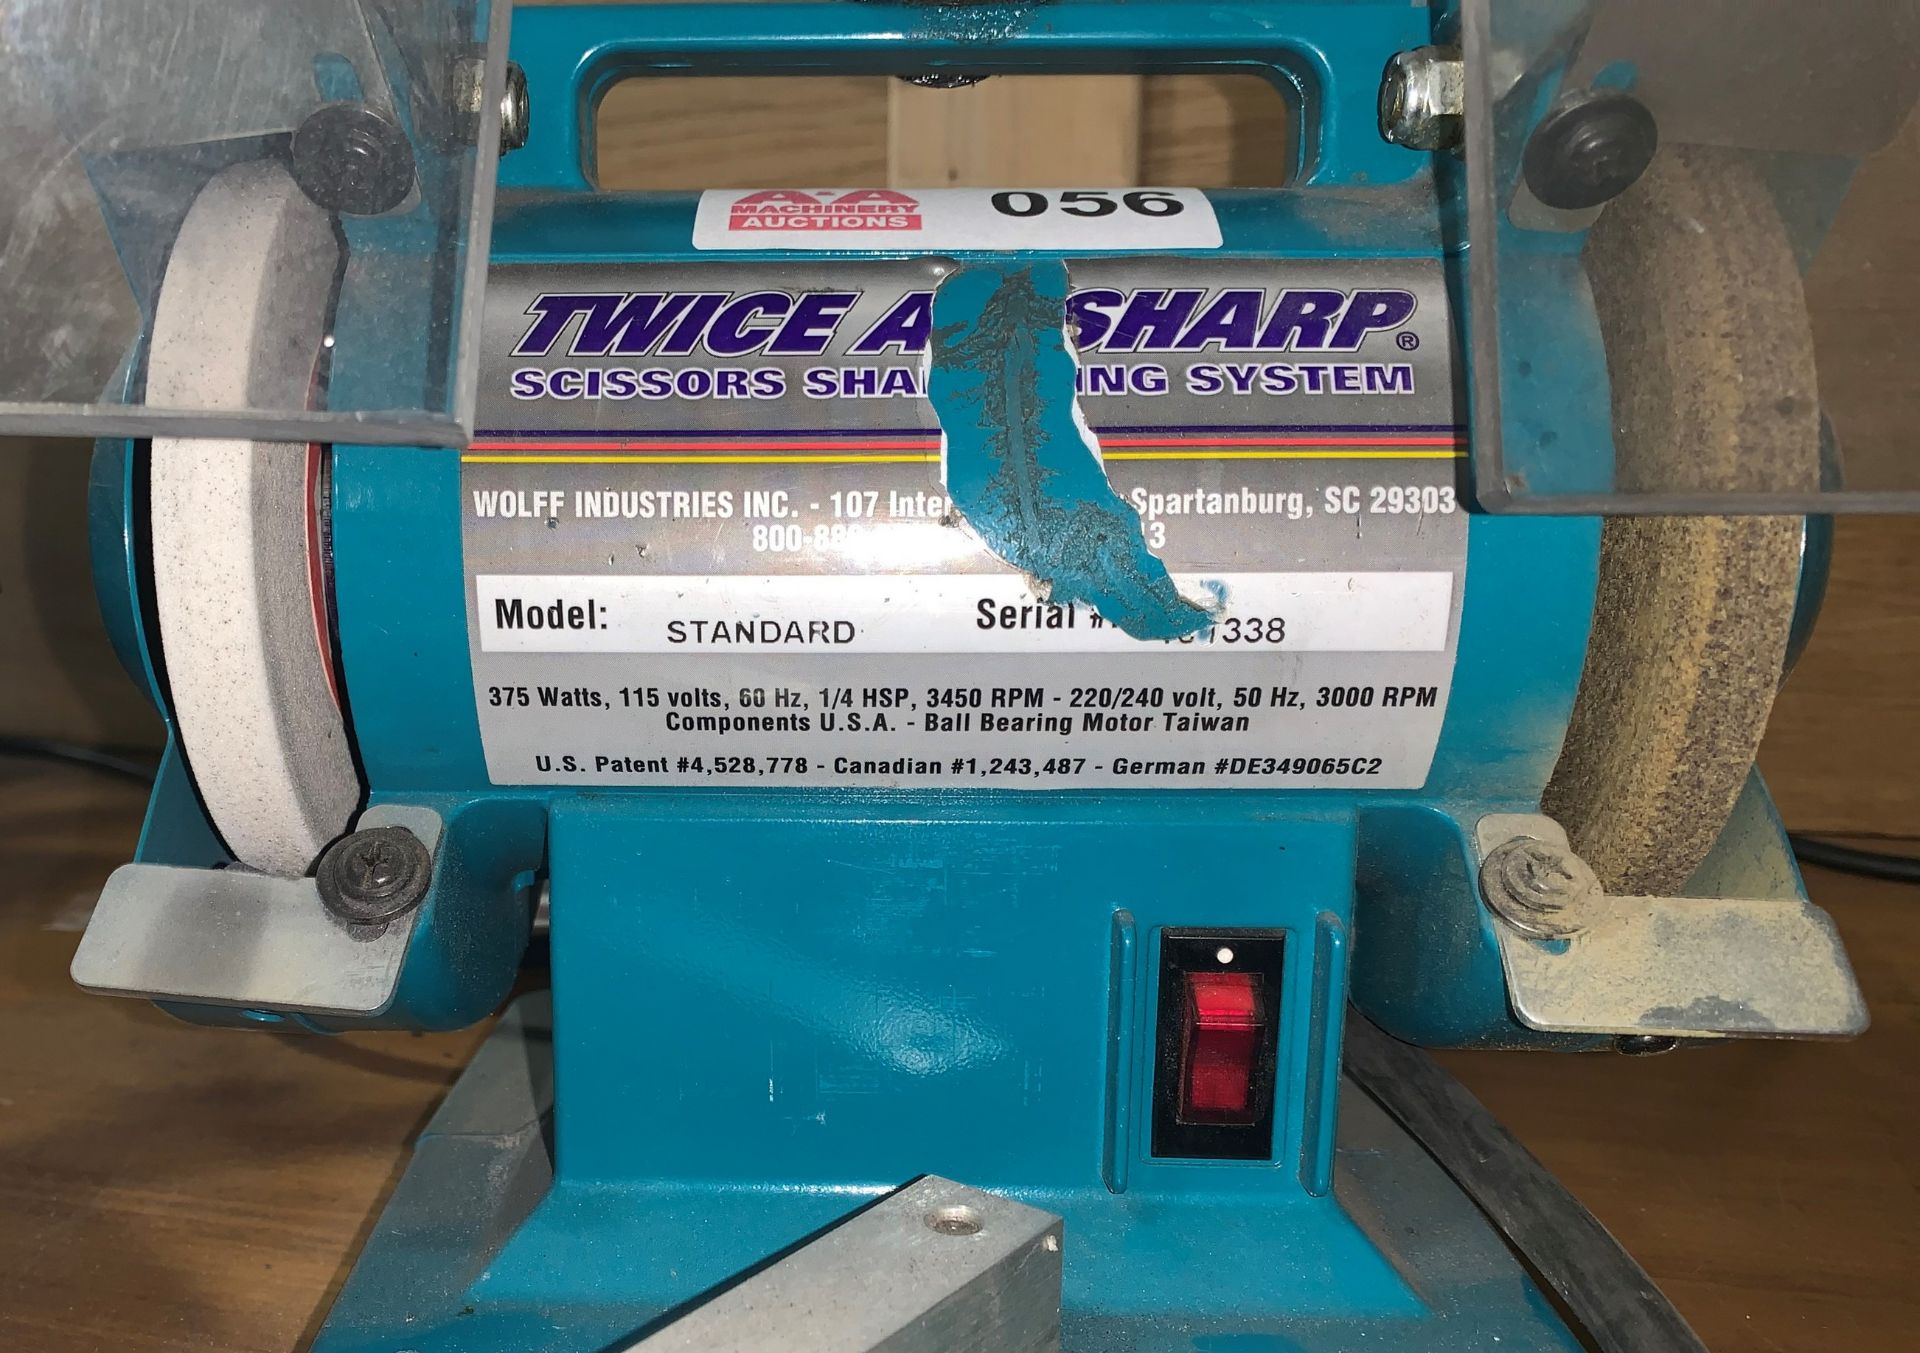 Wolff Industries Inc. Twice As Sharp Scissor Sharpening System - Image 3 of 3